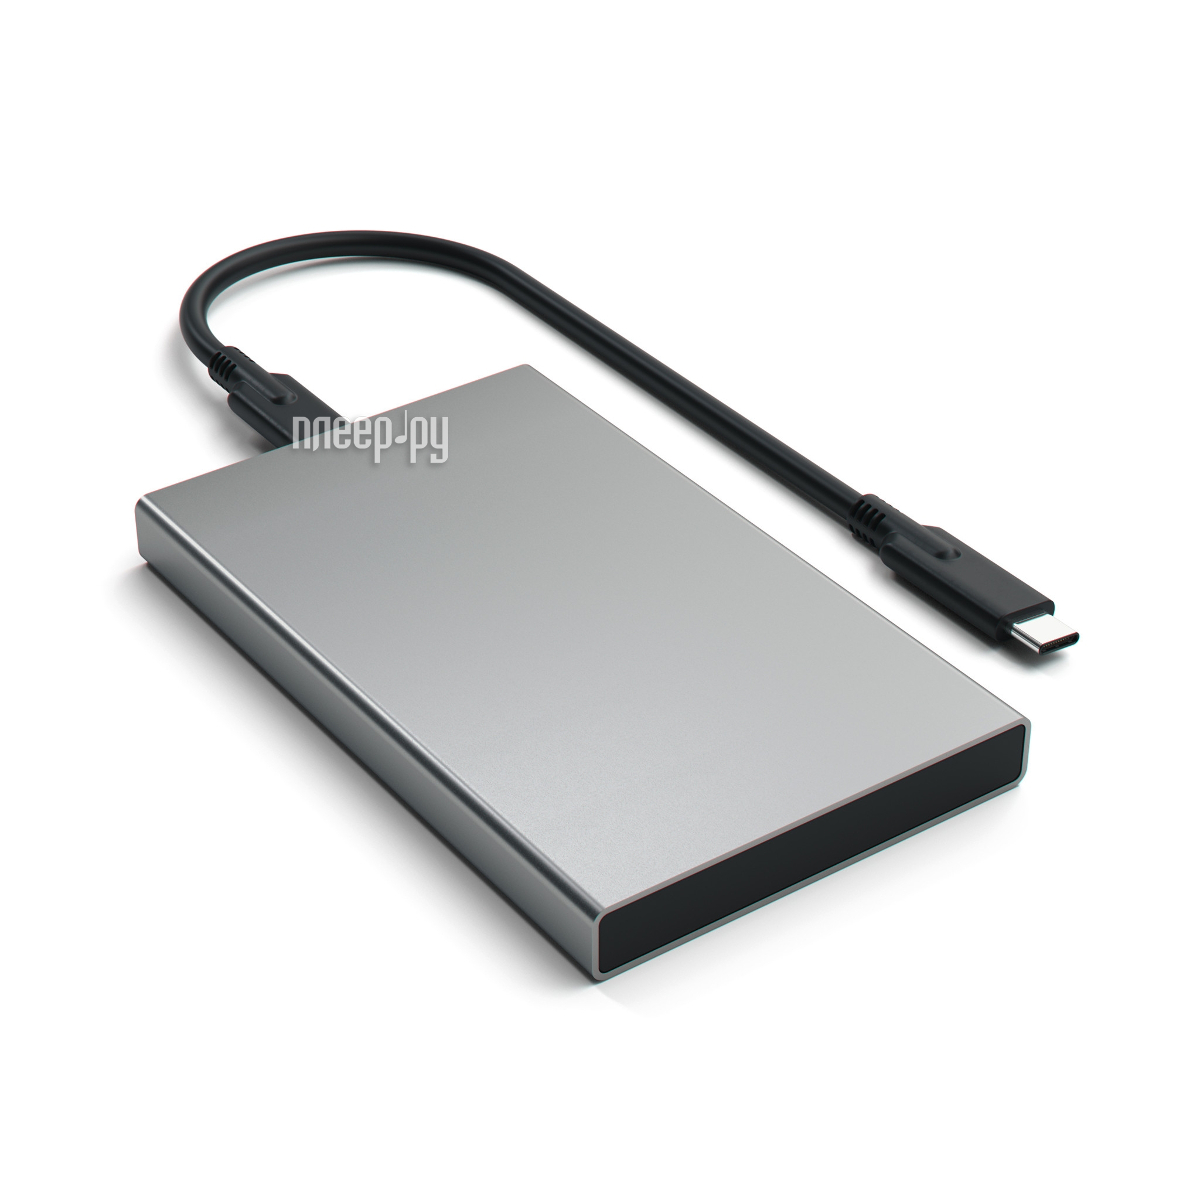    HDD Satechi Aluminum ST-TCDEM HDD 2.5 USB Type C External Space Gray  2503 